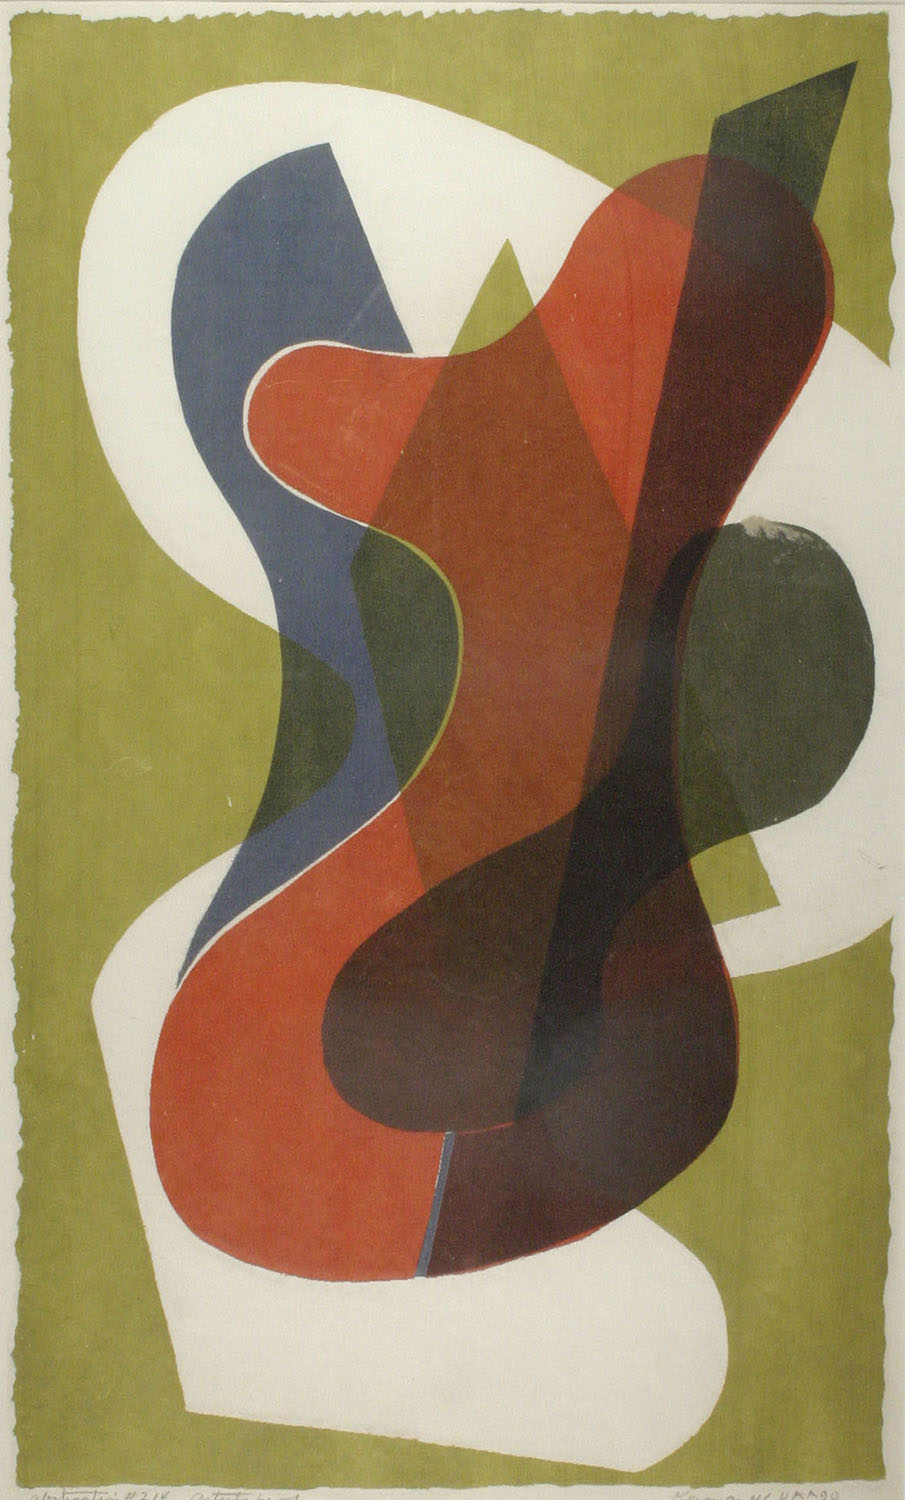 Myron Kozman, Abstraction #214, 1941. Screenprint. Collection of DePaul University, gift of Louise and Bruce Lincoln, 2004.1